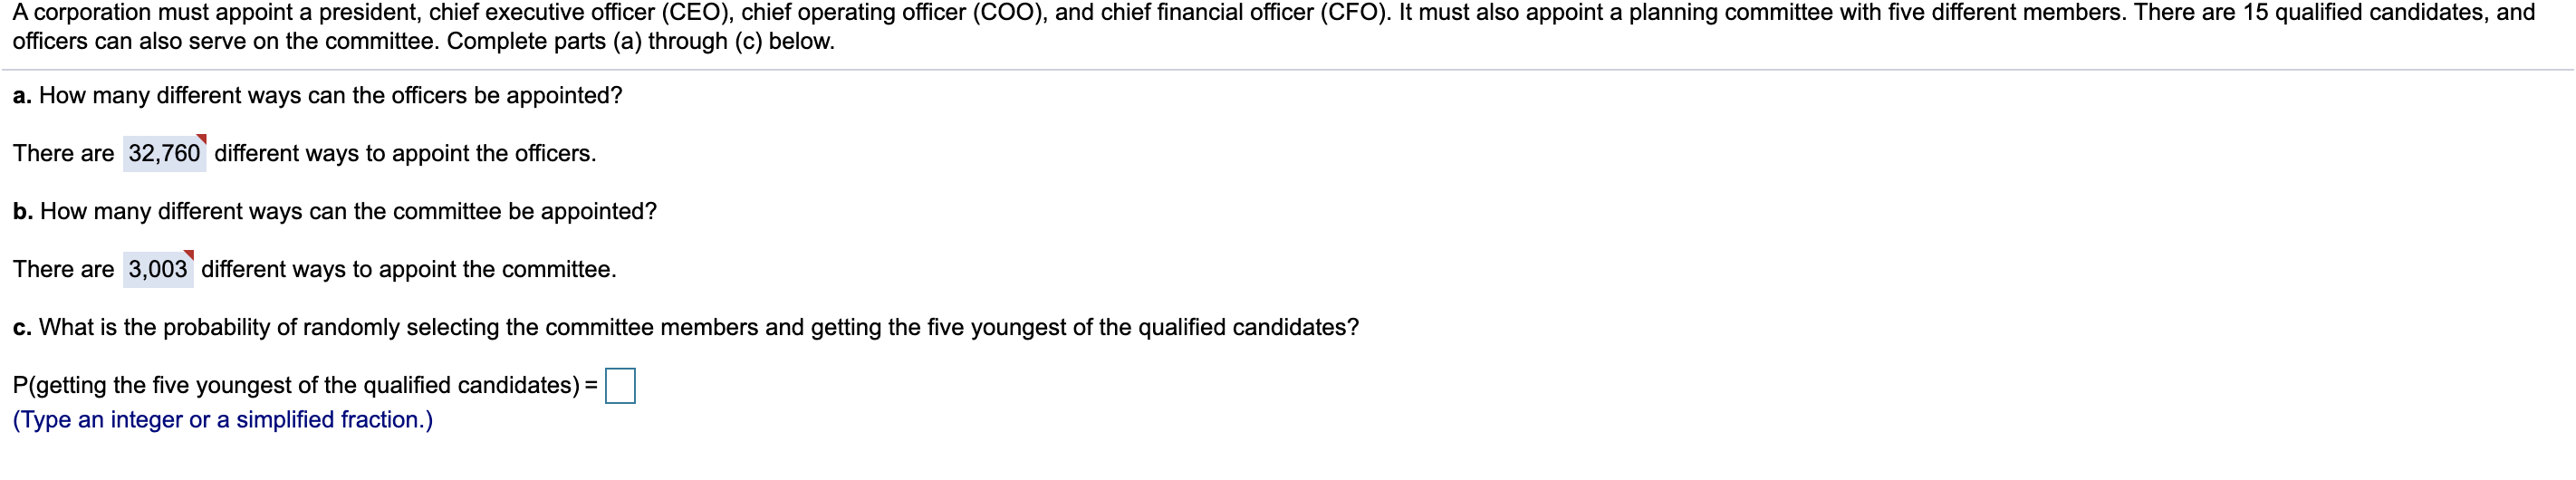 A corporation must appoint a president, chief executive officer (CEO), chief operating officer (CO0), and chief financial officer (CFO). It must also appoint a planning committee with five different members. There are 15 qualified candidates, and
officers can also serve on the committee. Complete parts (a) through (c) below.
a. How many different ways can the officers be appointed?
There are 32,760` different ways to appoint the officers.
b. How many different ways can the committee be appointed?
There are 3,003 different ways to appoint the committee.
c. What is the probability of randomly selecting the committee members and getting the five youngest of the qualified candidates?
P(getting the five youngest of the qualified candidates) =
(Type an integer or a simplified fraction.)
